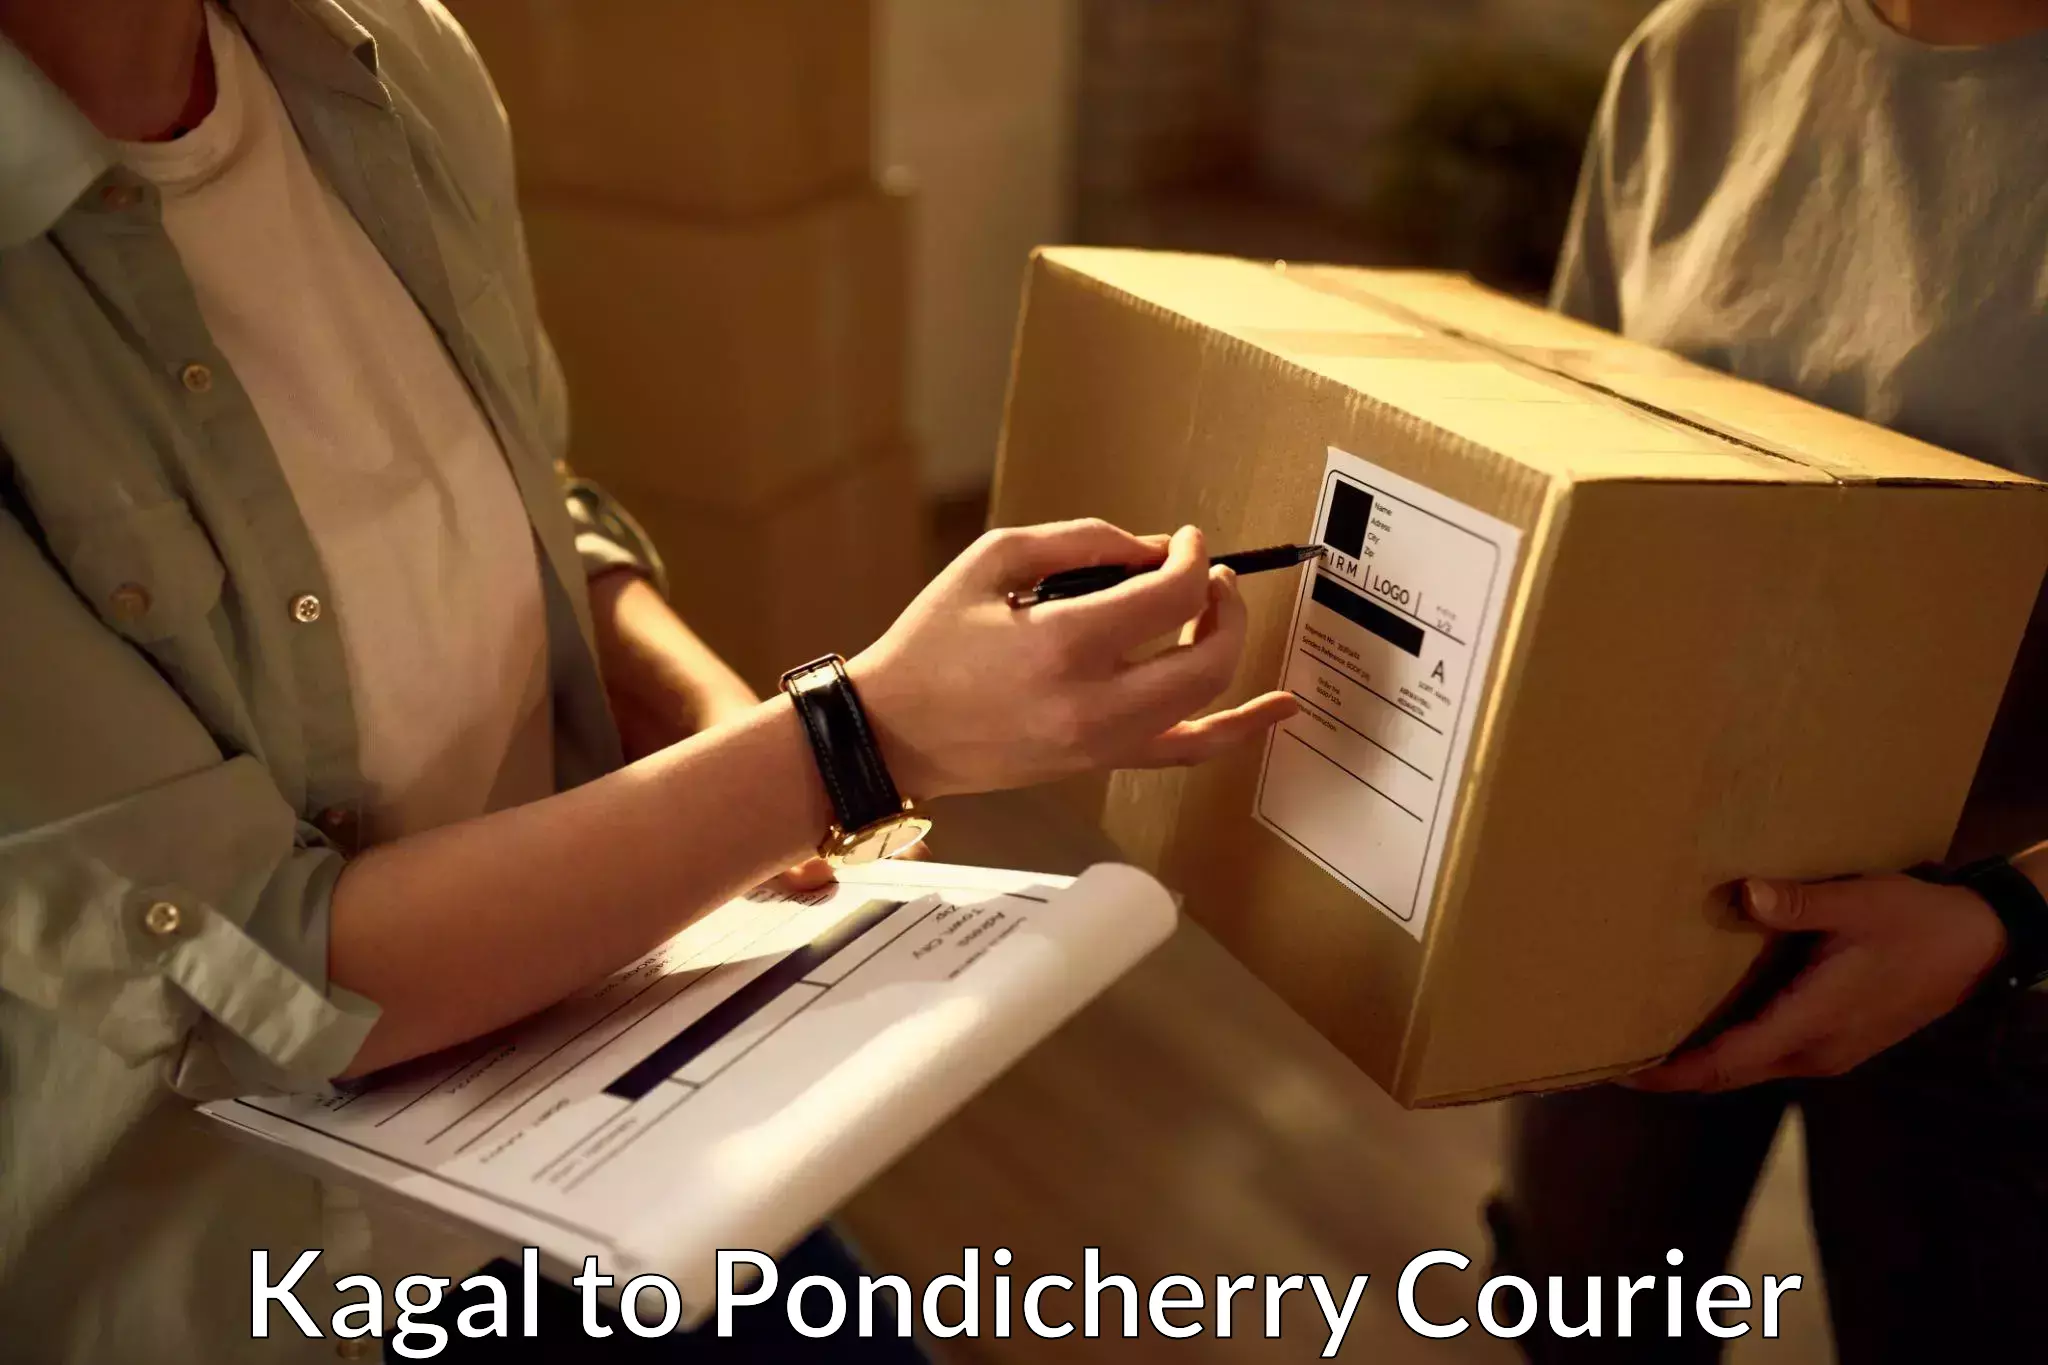 Sustainable delivery practices Kagal to Pondicherry